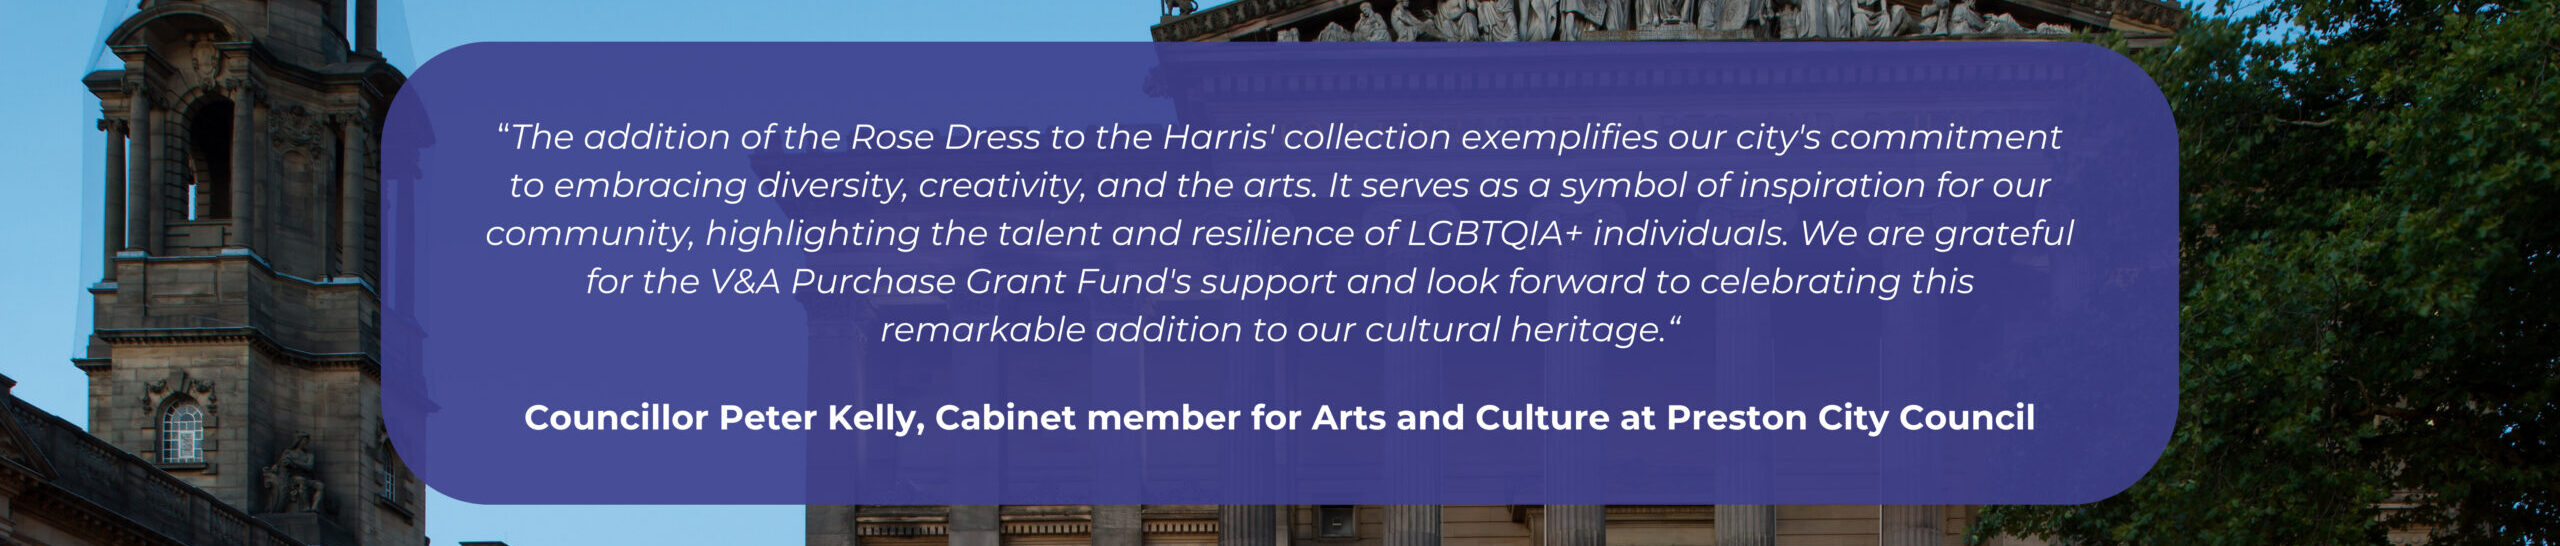 A quote from councillor Peter Kelly that reads: the addition of the Rose Dress to the Harris' collection exemplifies our city's commitment to embracing diversity, creativity, and the arts. It serves as a symbol of inspiration for our community, highlighting the talent and resilience of LGBTQIA+ individuals. We are grateful for the V&A Purchase Grant Fund's support and look forward to celebrating this remarkable addition to our cultural heritage.